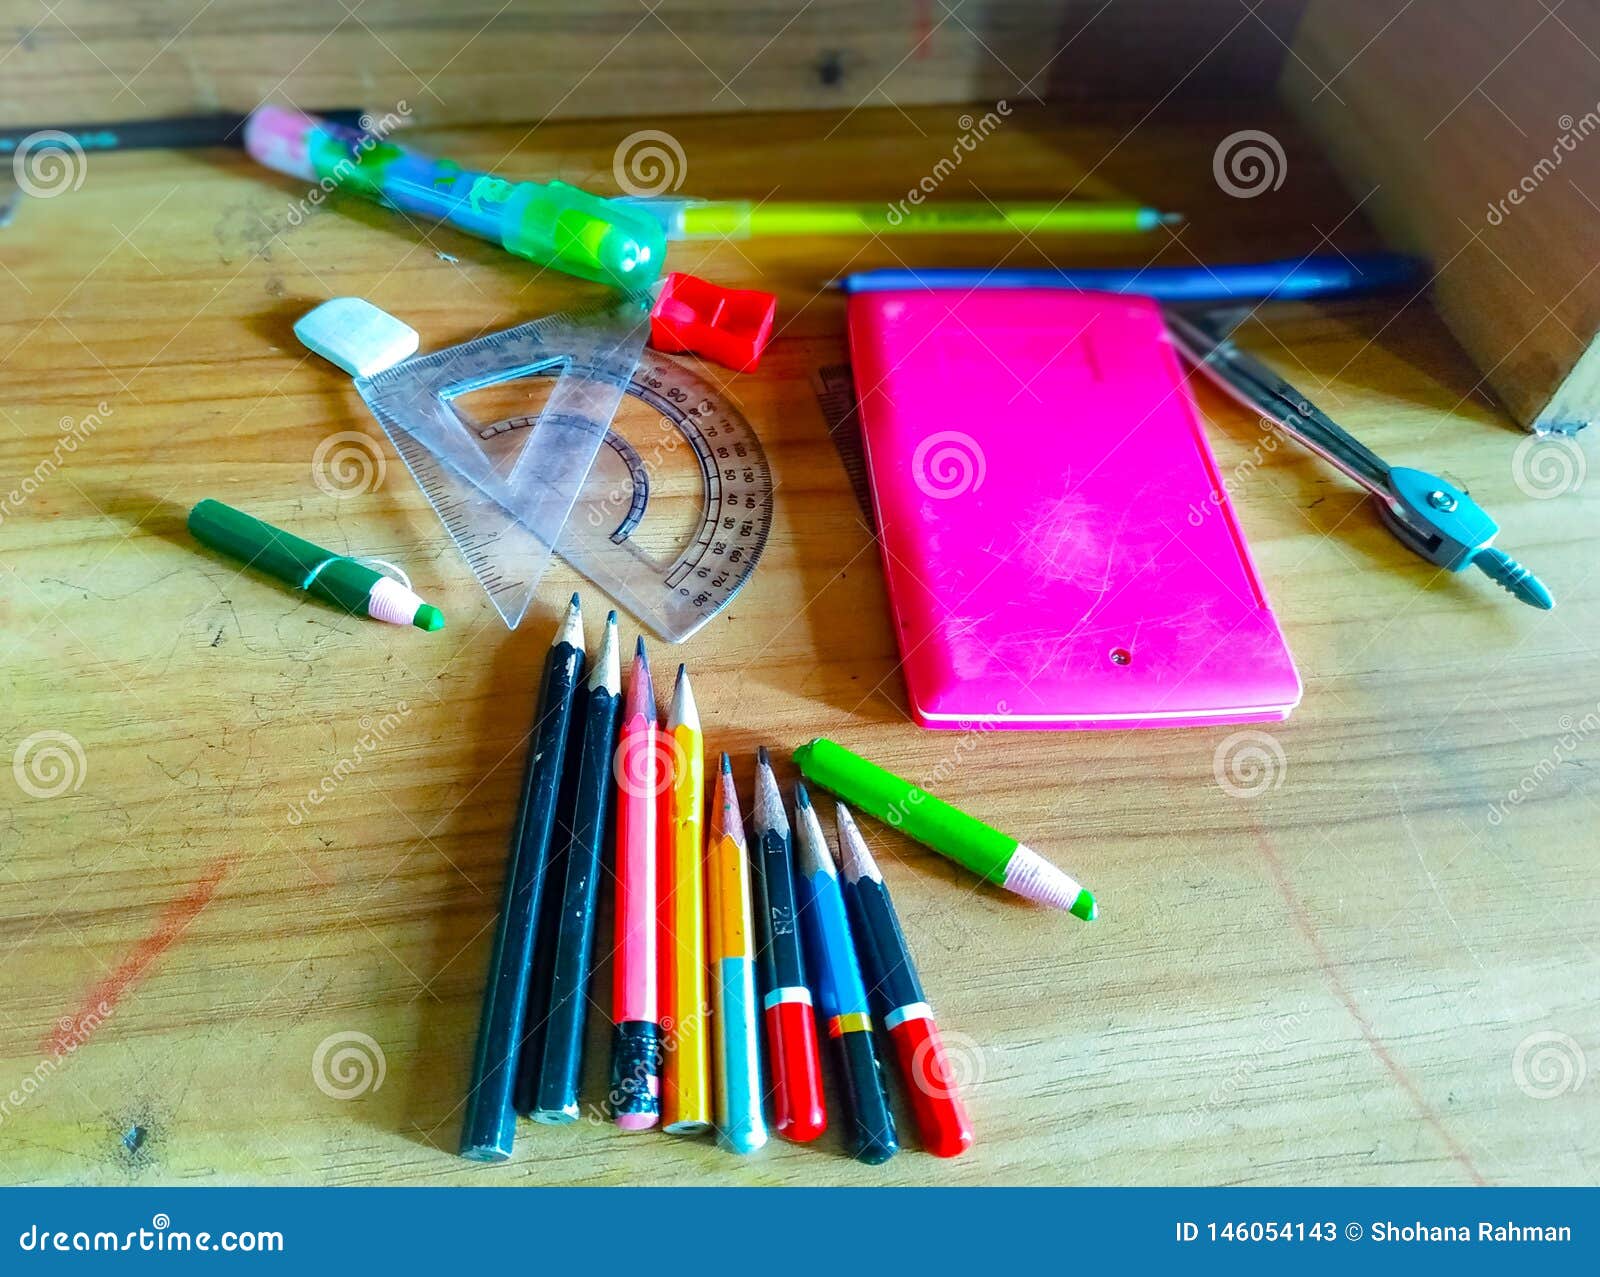 educational equipments and stationeries  on the table